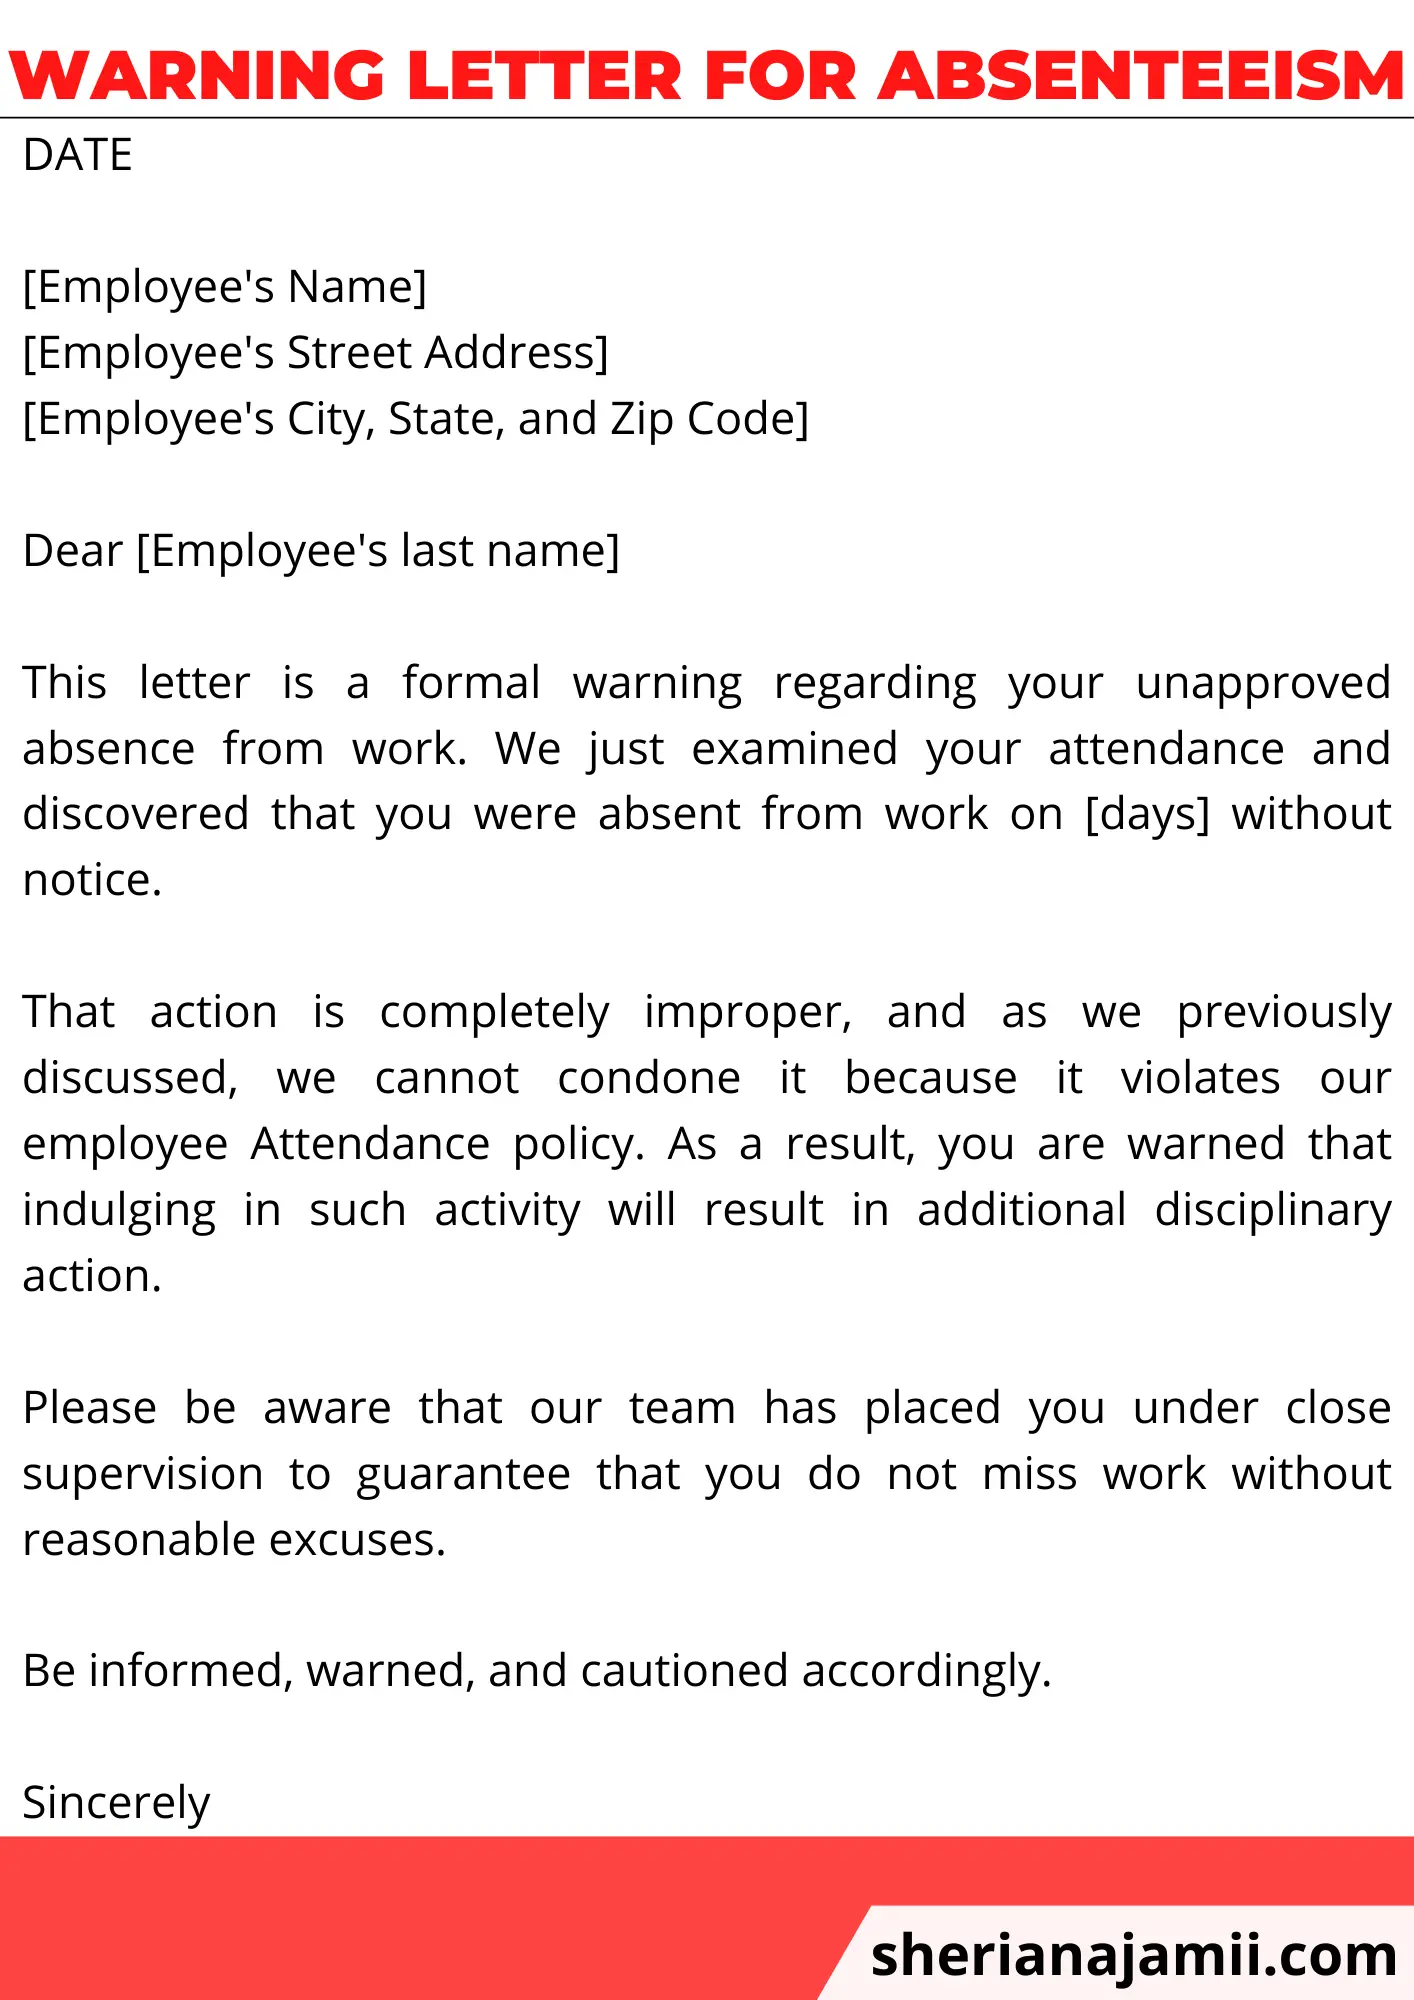 Warning letter for absenteeism, employee warning letter for absenteeism, Warning letter for absenteeism sample, Warning letter for absenteeism template